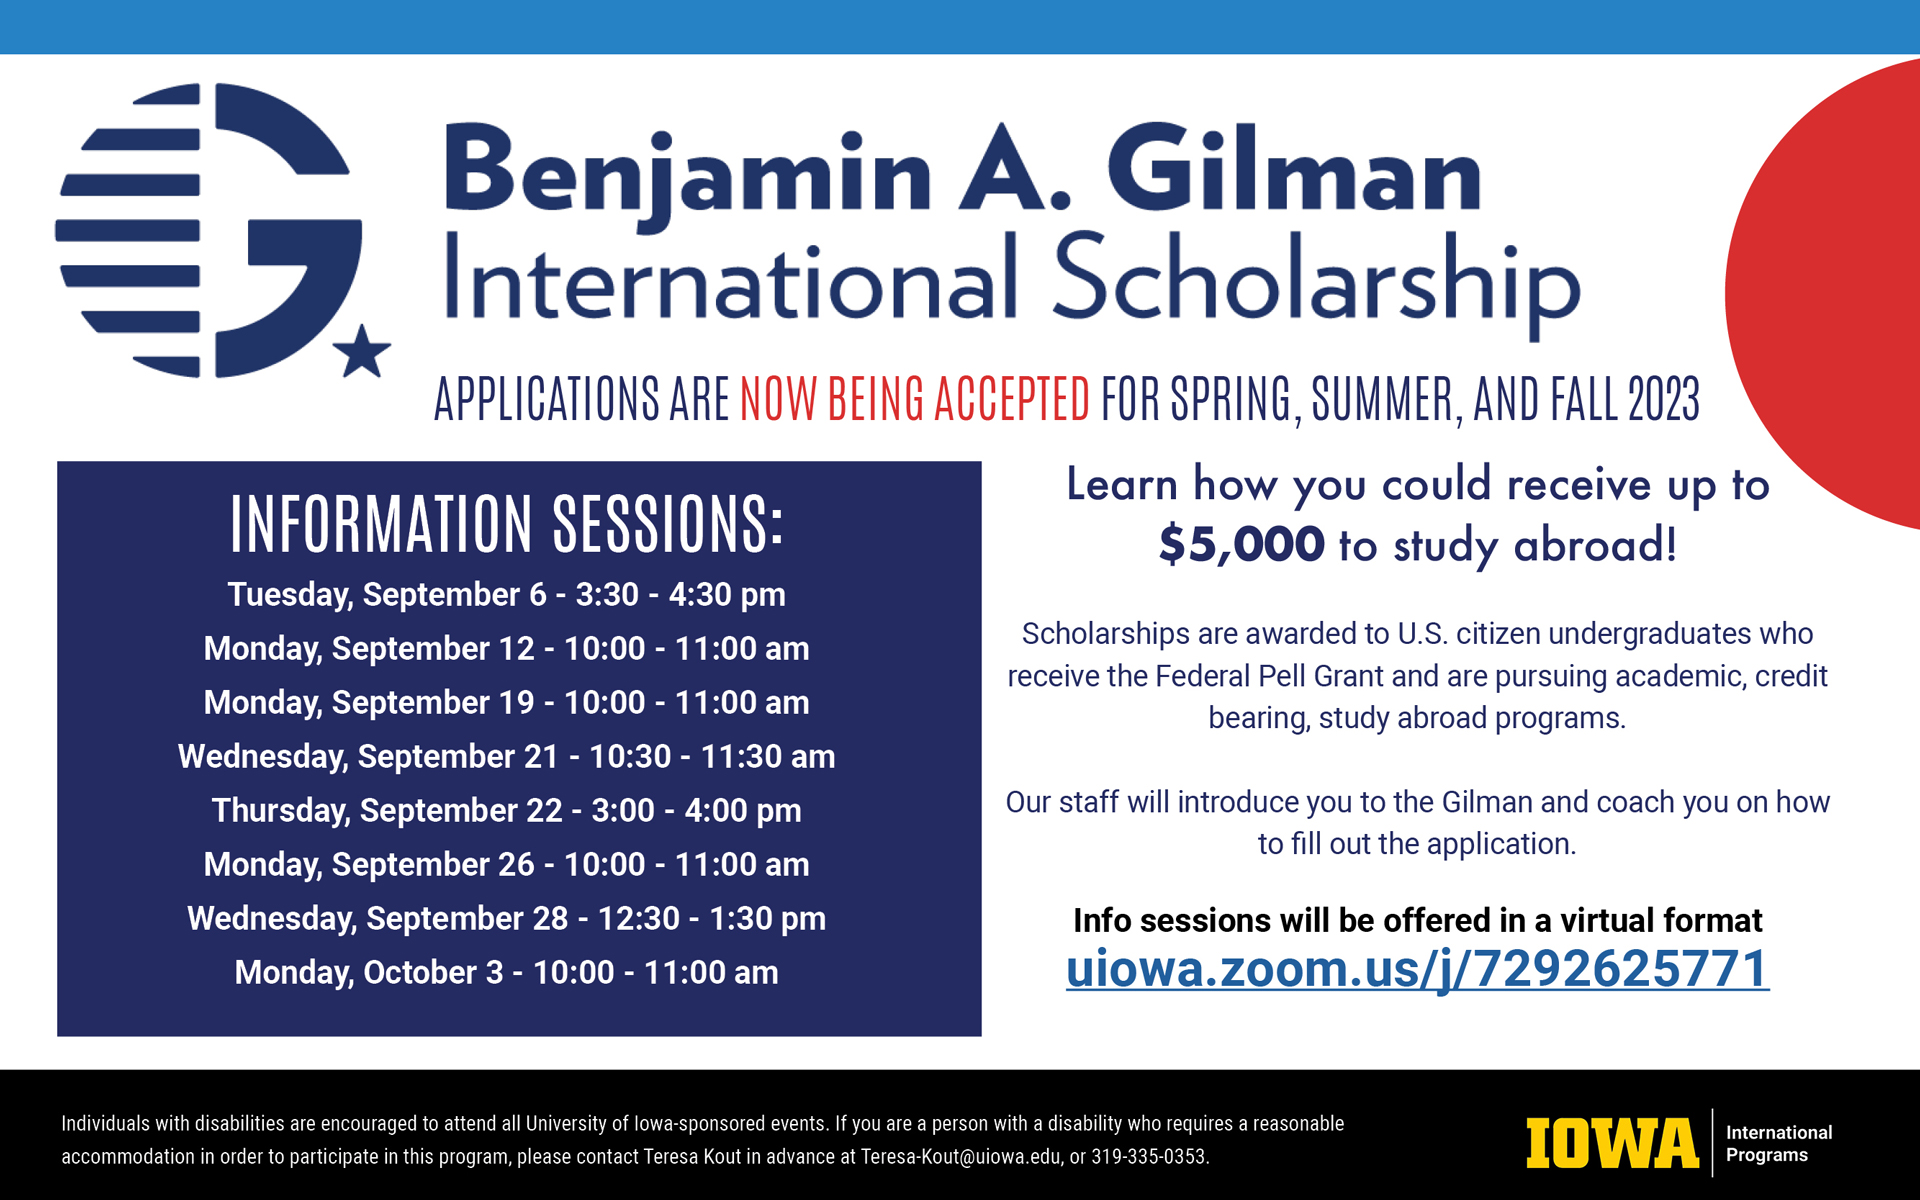 Benjamin A. Gilman International scholarship. Applications are now being accepted for Spring, Summer, and Fall 2023. Learn how you could receive up to $5,000 to study aboard! Scholarships are awarded to US citizen undergraduates who receive the Federal Pell Grant and are pursuing academic, credit bearing, study abroad programs. Our staff will introduce you to the Gilman and coach you on how to fill out the application. Info sessions will be offered in a virtual format. uiowa.edu.zoom.us/j/7292625771. Information Sessions: Tuesday, September 6, 3:30m - 4:30 pm. Monday, September 12, 10:00 - 11:00 am. Monday, September 19, 10:00 - 11:00 am. Wednesday, September 21, 10:30 - 11:30 am. Thursday, September 22, 3:00 - 4:00 pm. Monday, September 26, 10:00 - 11:00 am. Wednesday, September 28, 12:30 - 1:30 pm. Monday, October 3, 10:00 - 11:00 am. Individuals with disabilities are encouraged to attend all University of Iowa-sponsored events. If you are a person with a disability who requires a reasonable accommodation in order to participate in this program, please contact Teresa Kout in advance at teresa-kout@uiowa.edu, or 319-335-0353. 